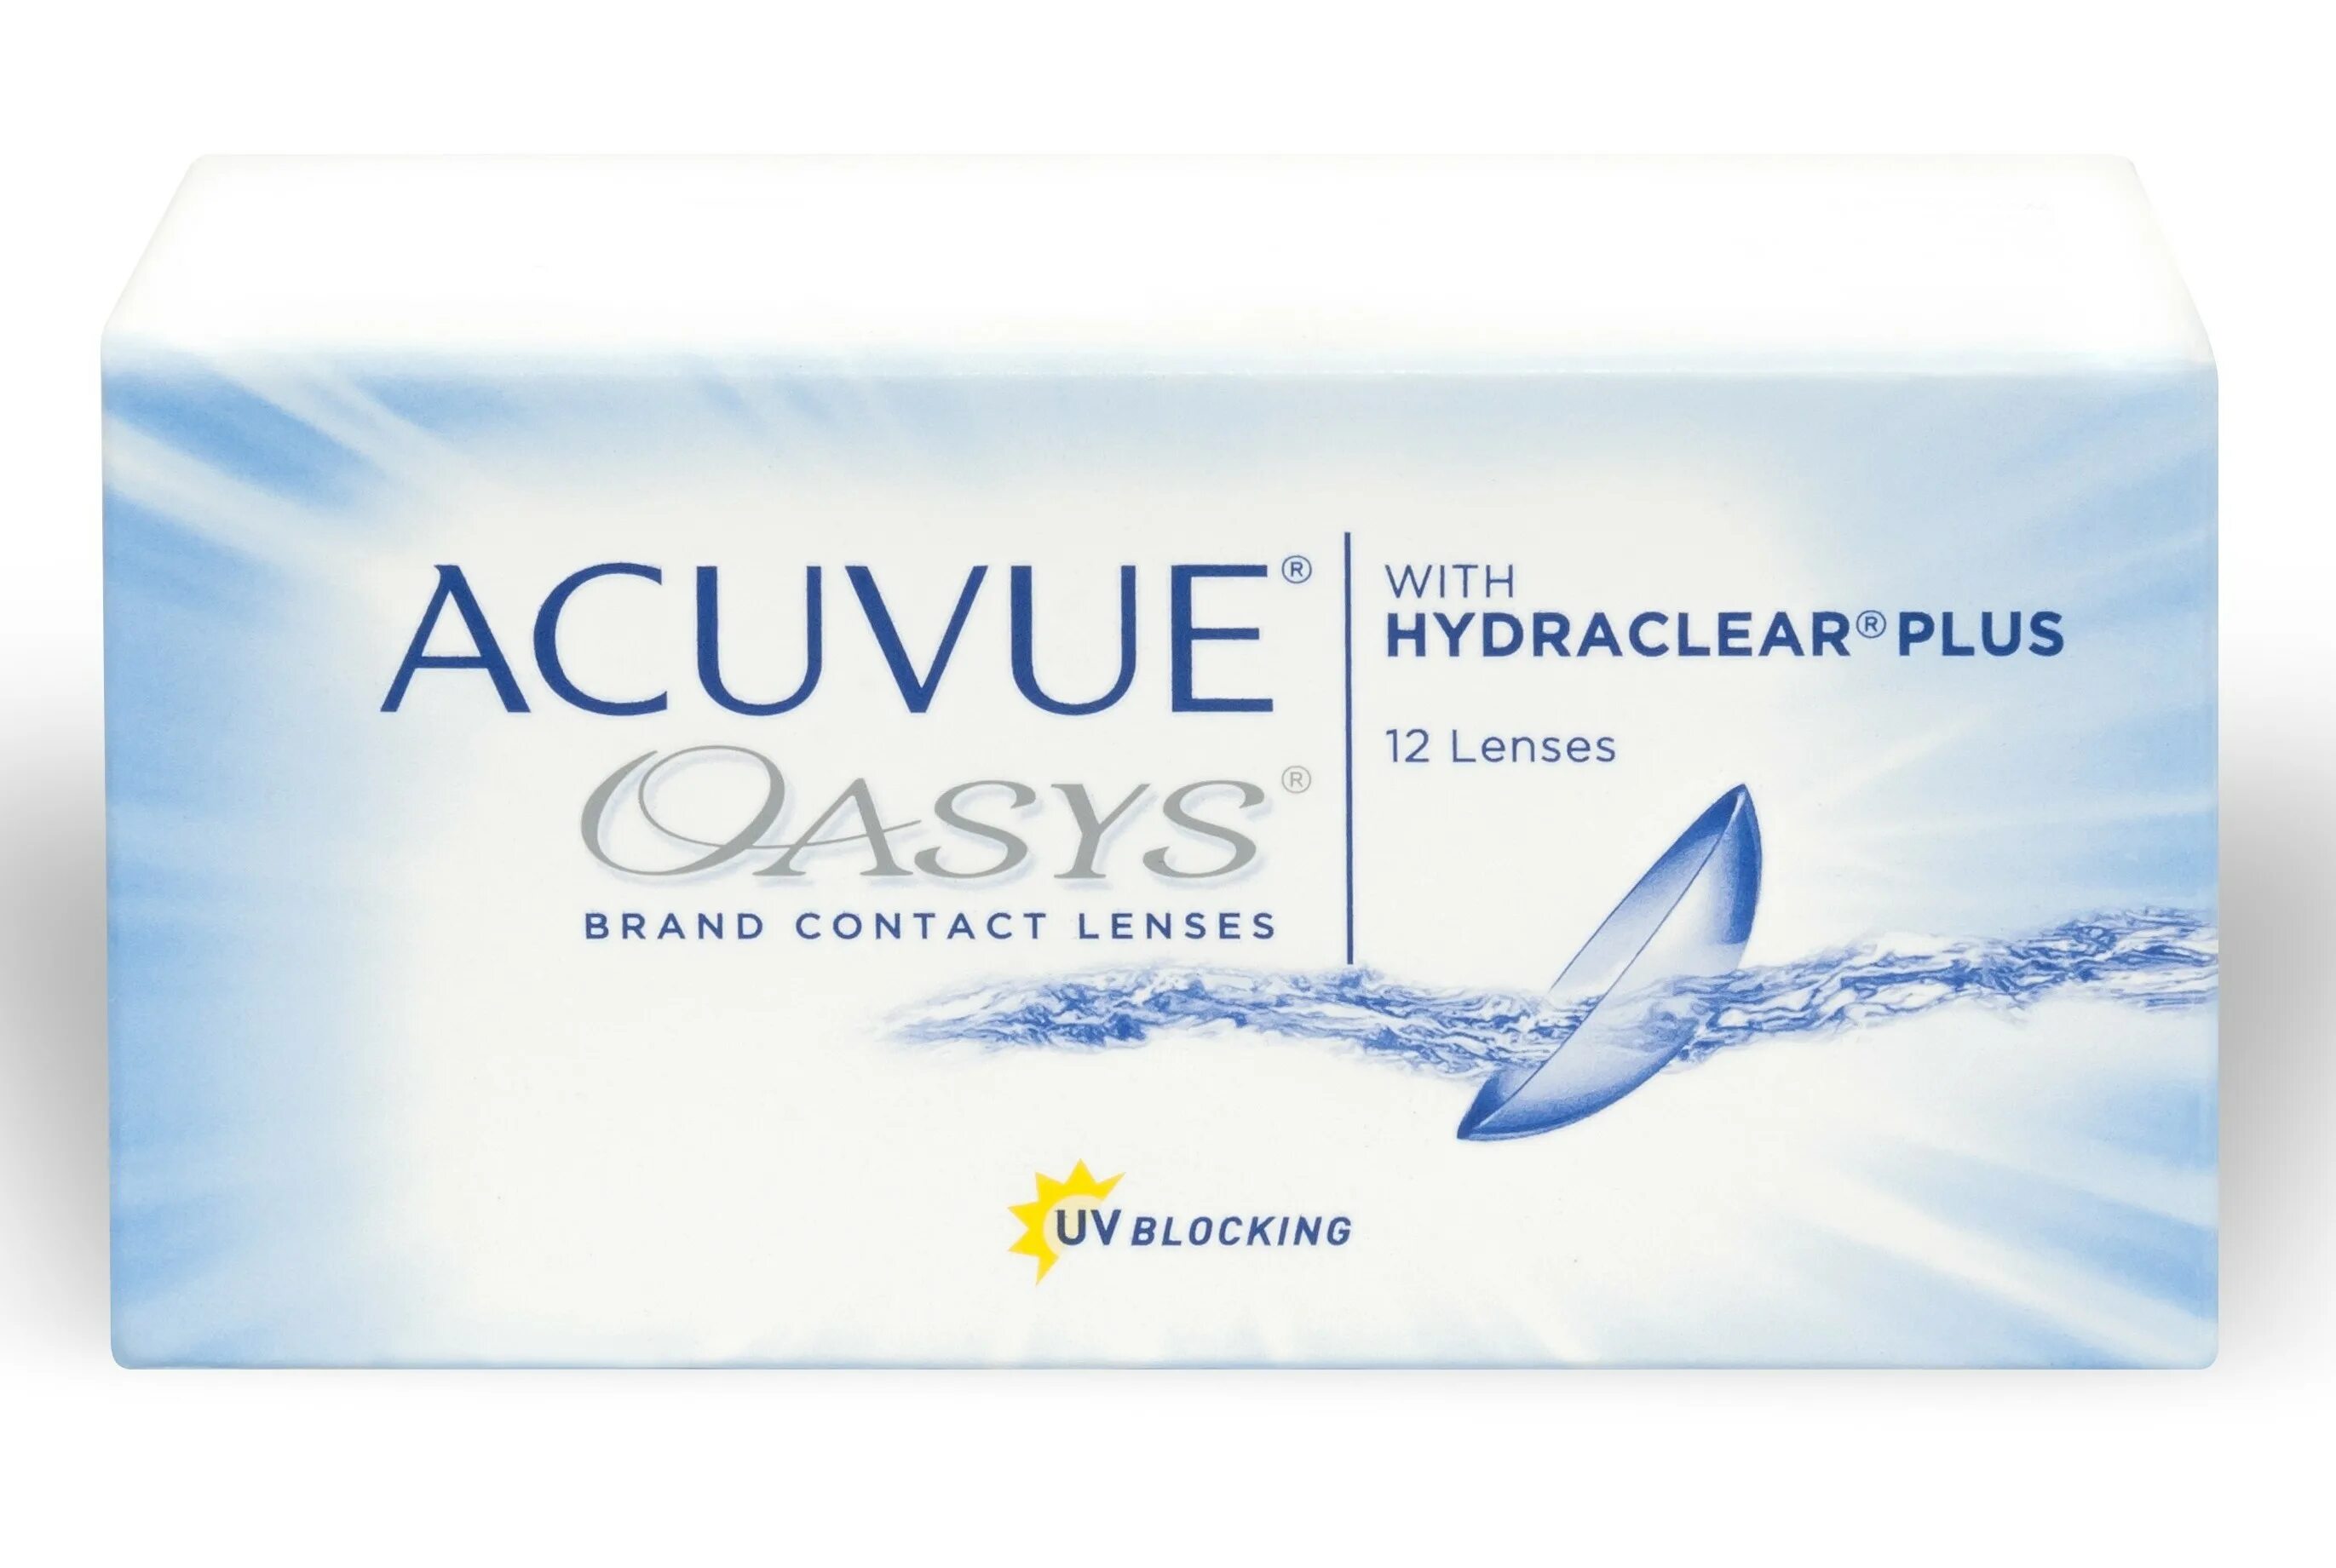 Acuvue Oasys with Hydraclear 12 линзы. Acuvue Oasys with Hydraclear Plus. Линзы акувью Оазис 2 недельные. Acuvue Oasys with Hydraclear 2 недели. Купить линзы недельные